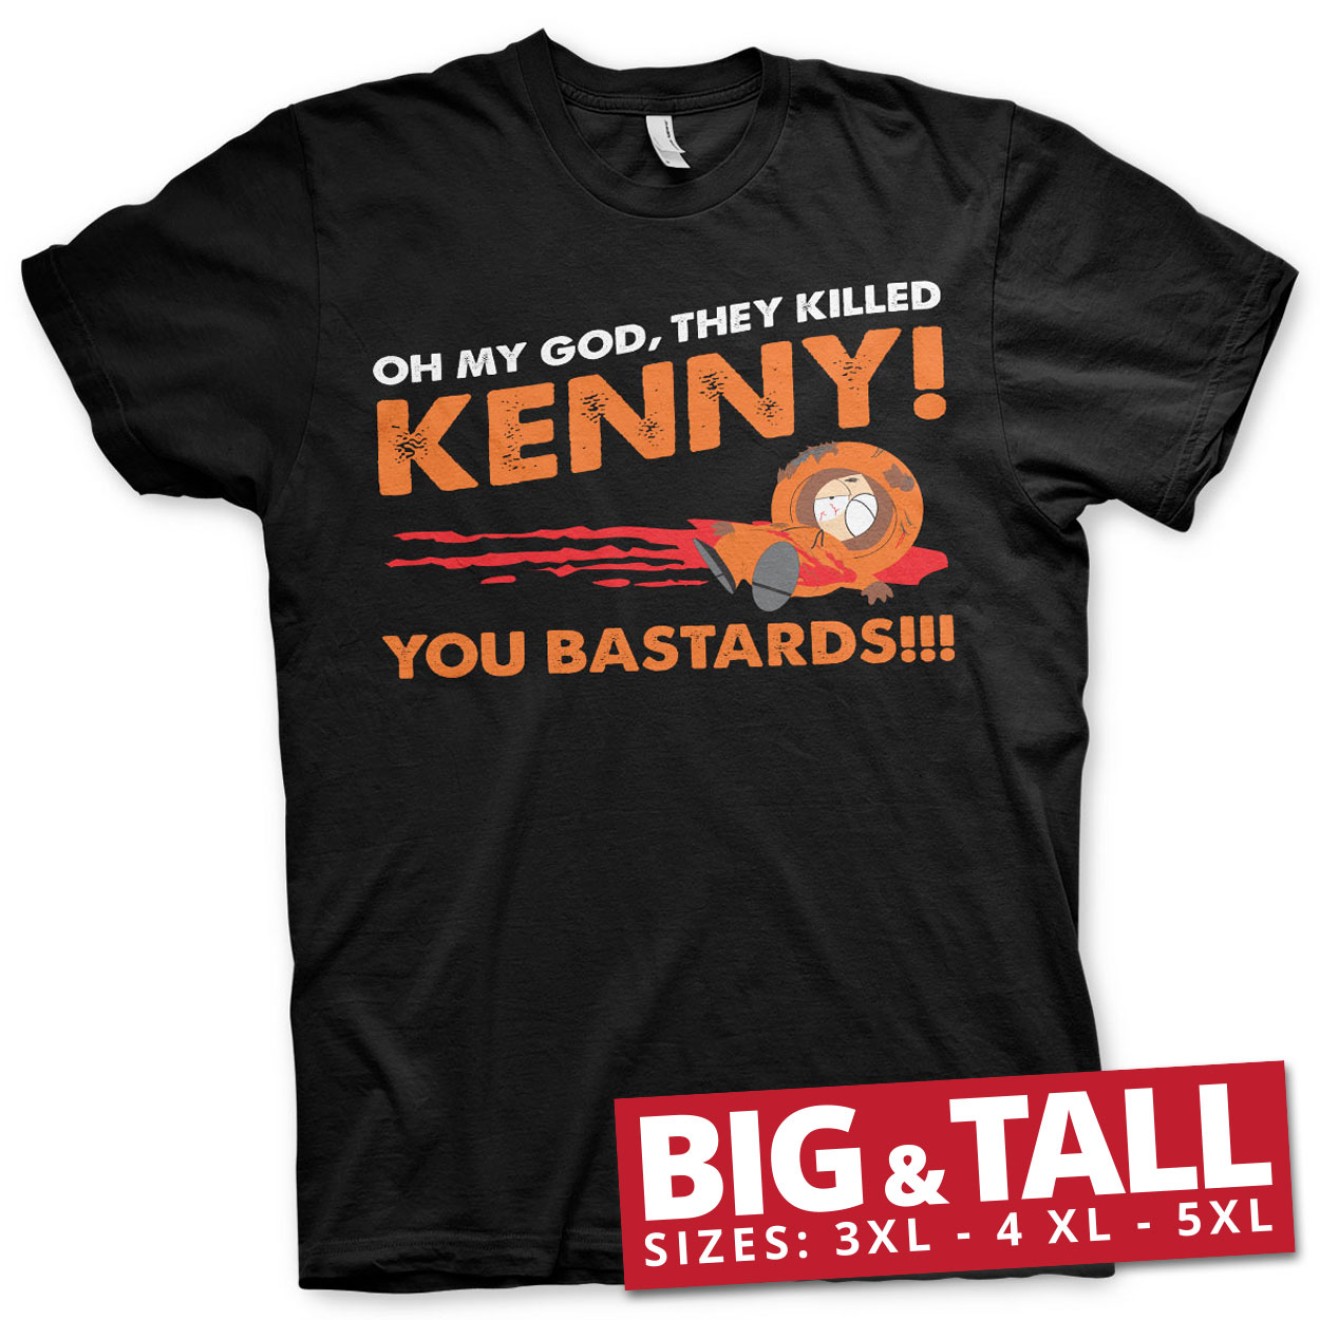 South Park - They Killed Kenny T-Shirt Big & Tall